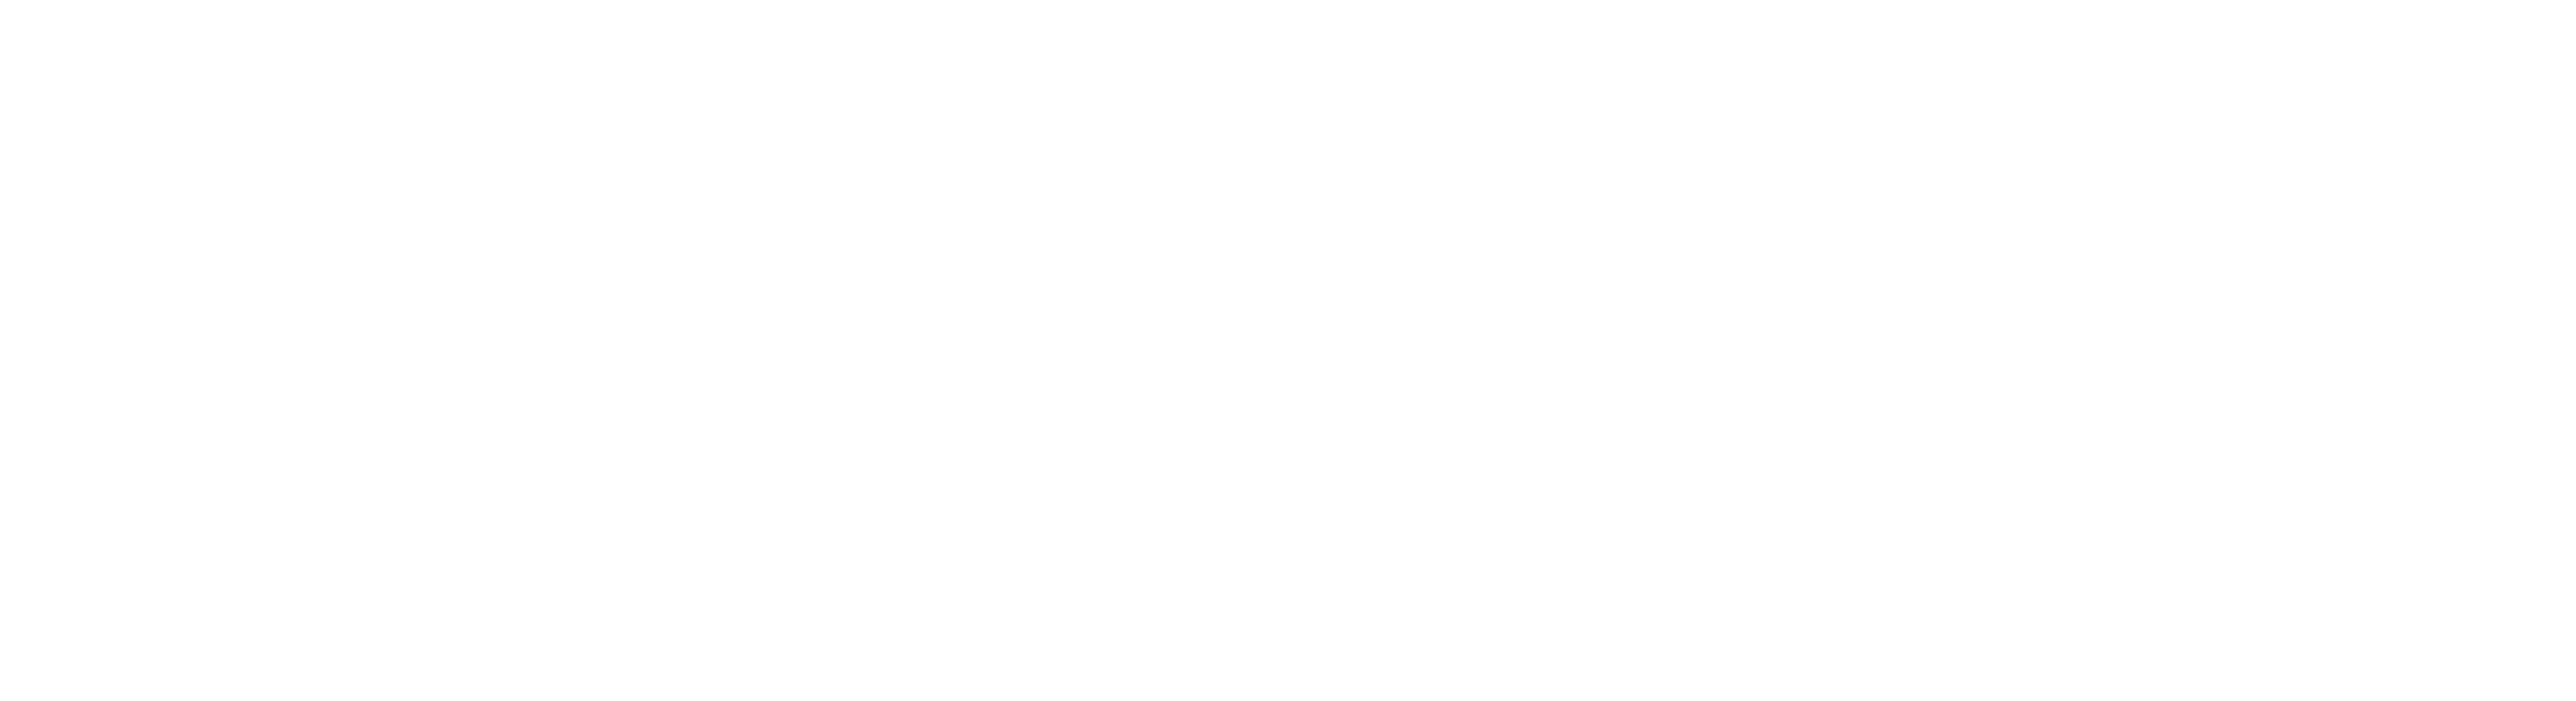 AHK Greater China Xceleration Days 2024-中文站点